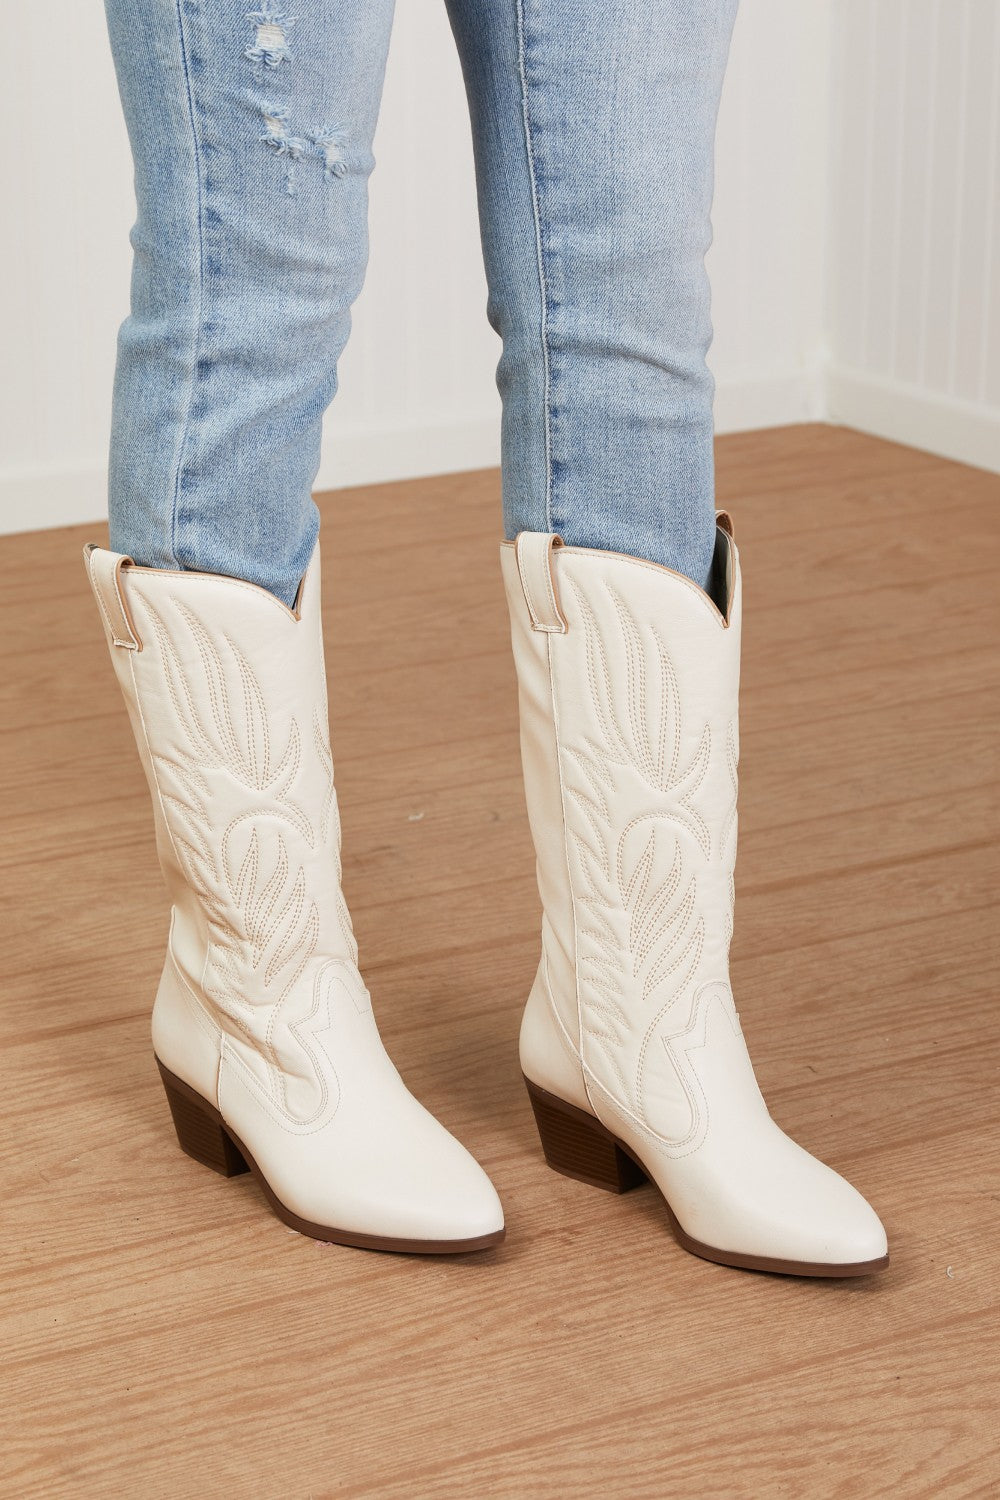 East Lion Corp Mountain Fever Mid-Calf Cowboy Boots in Cream shoes Southern Soul Collectives 